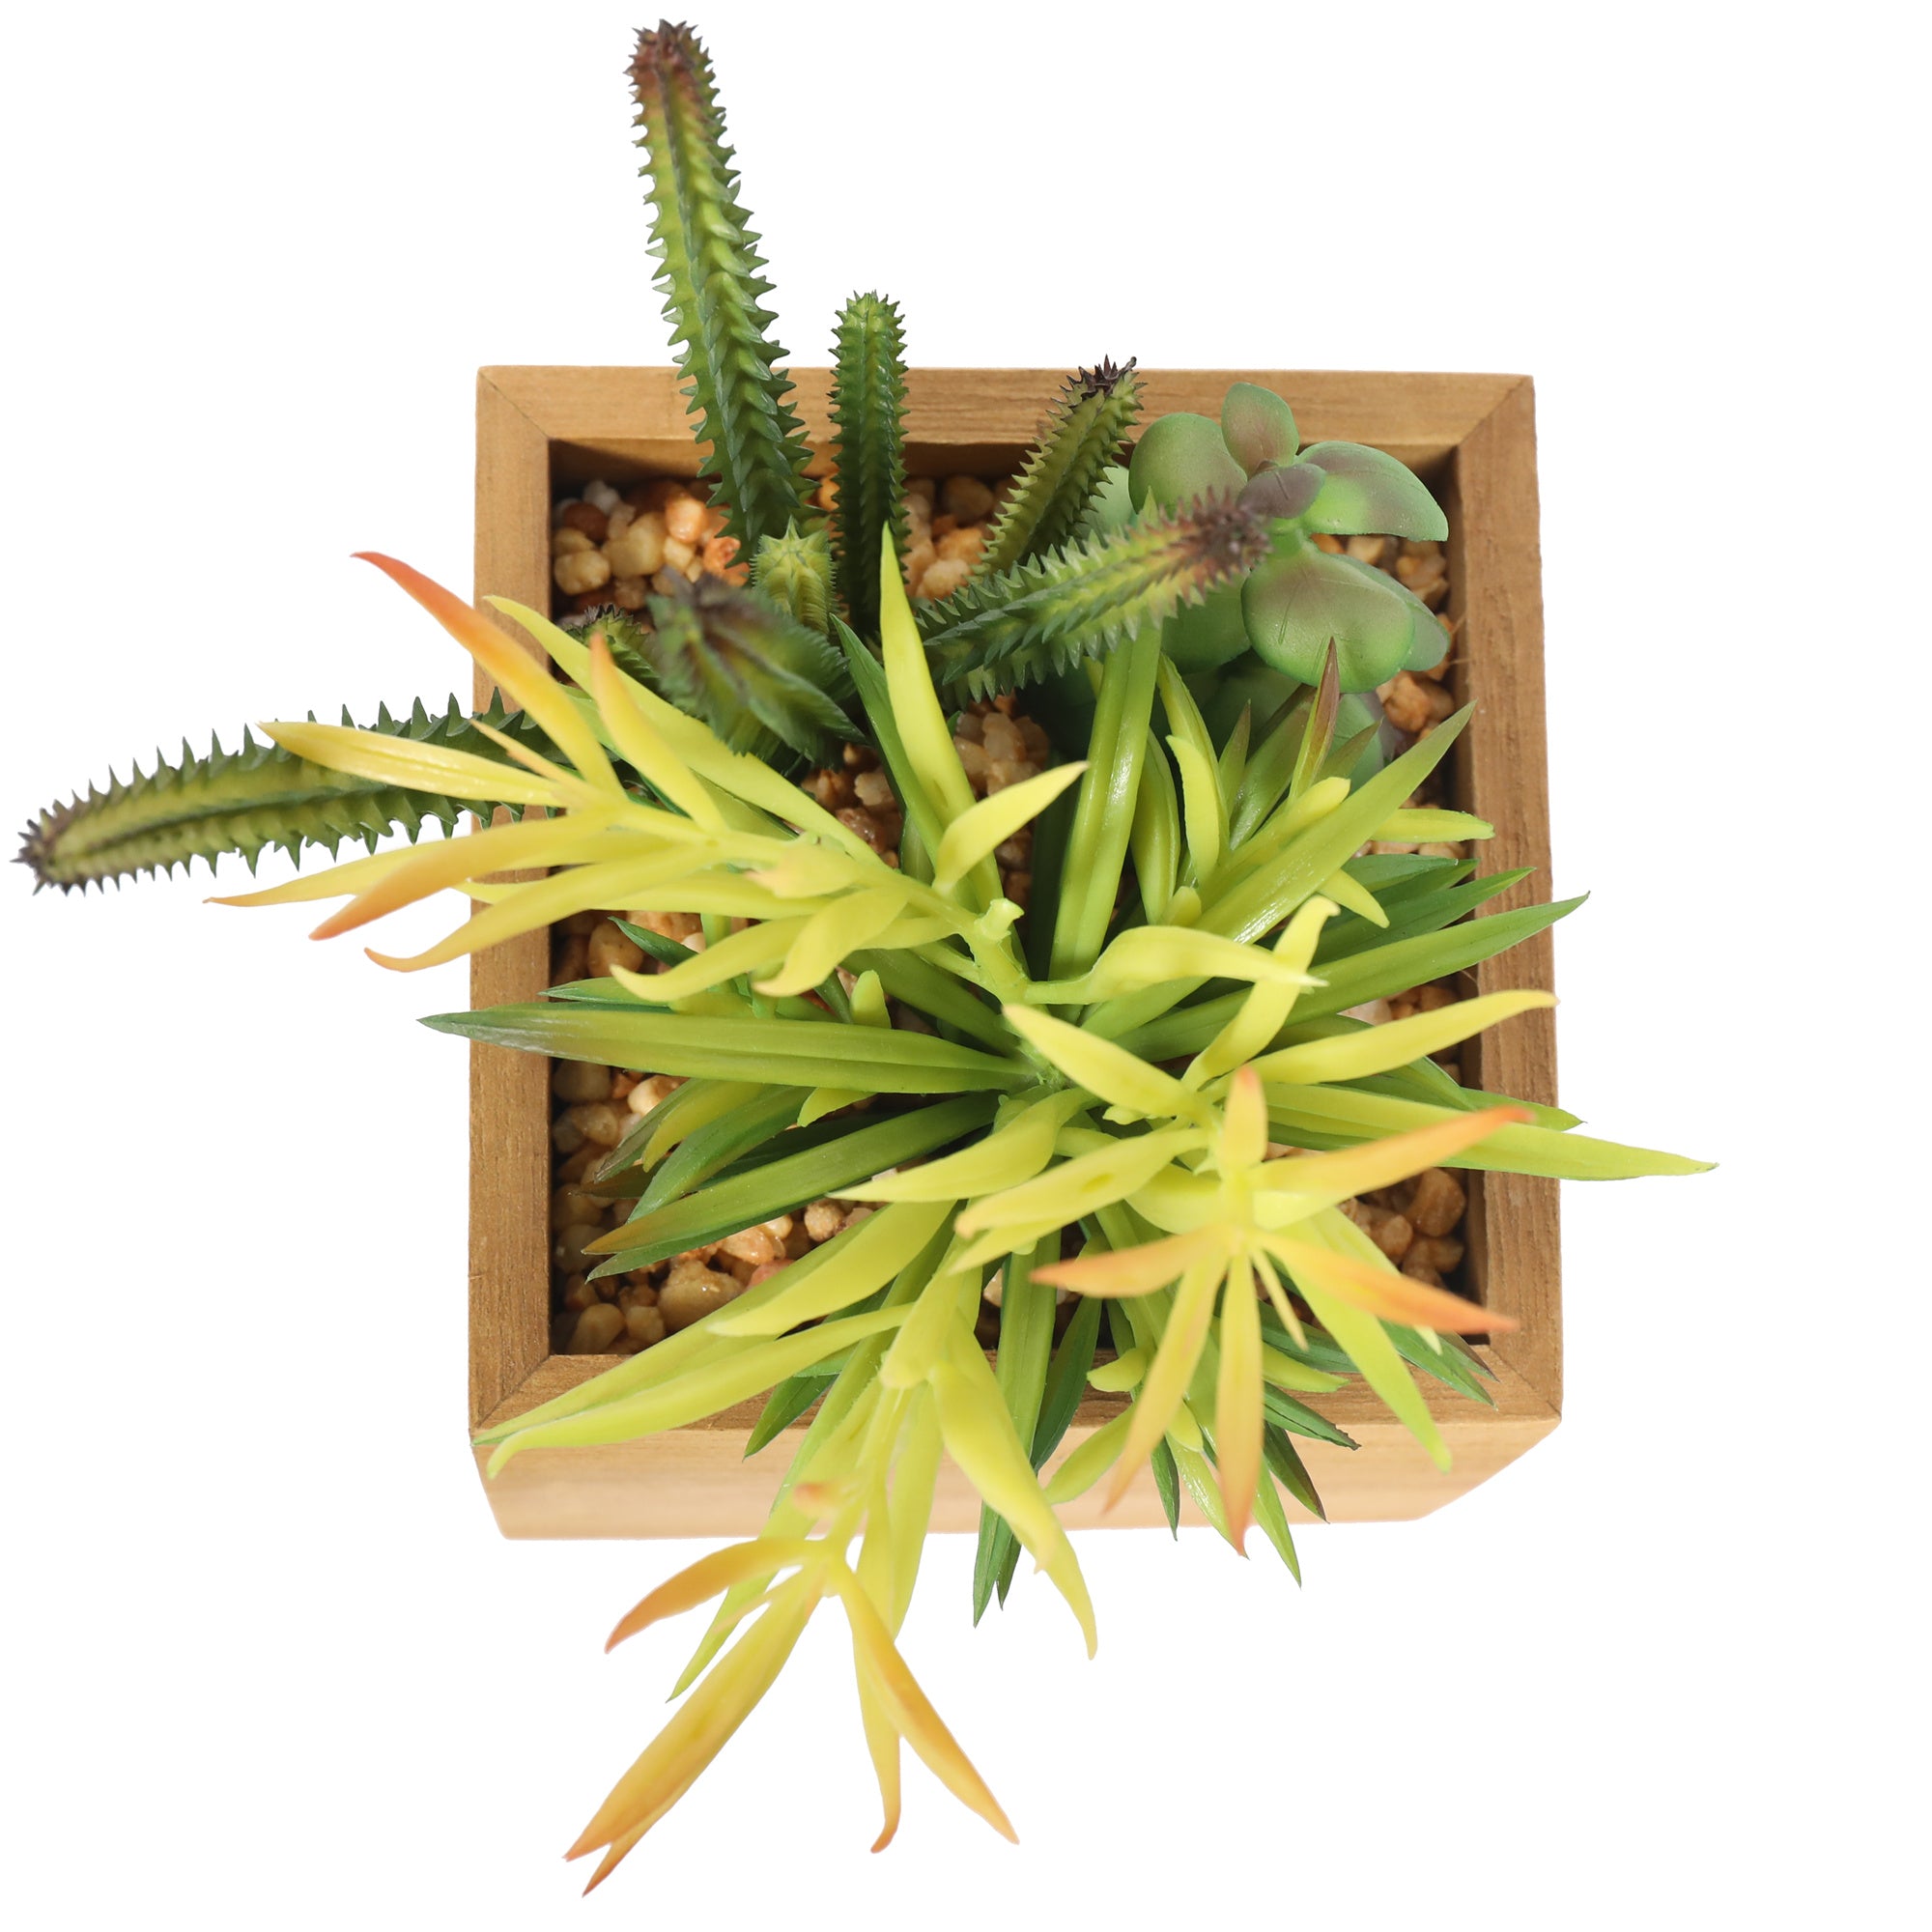 Simple Succulent plant in a wooden box